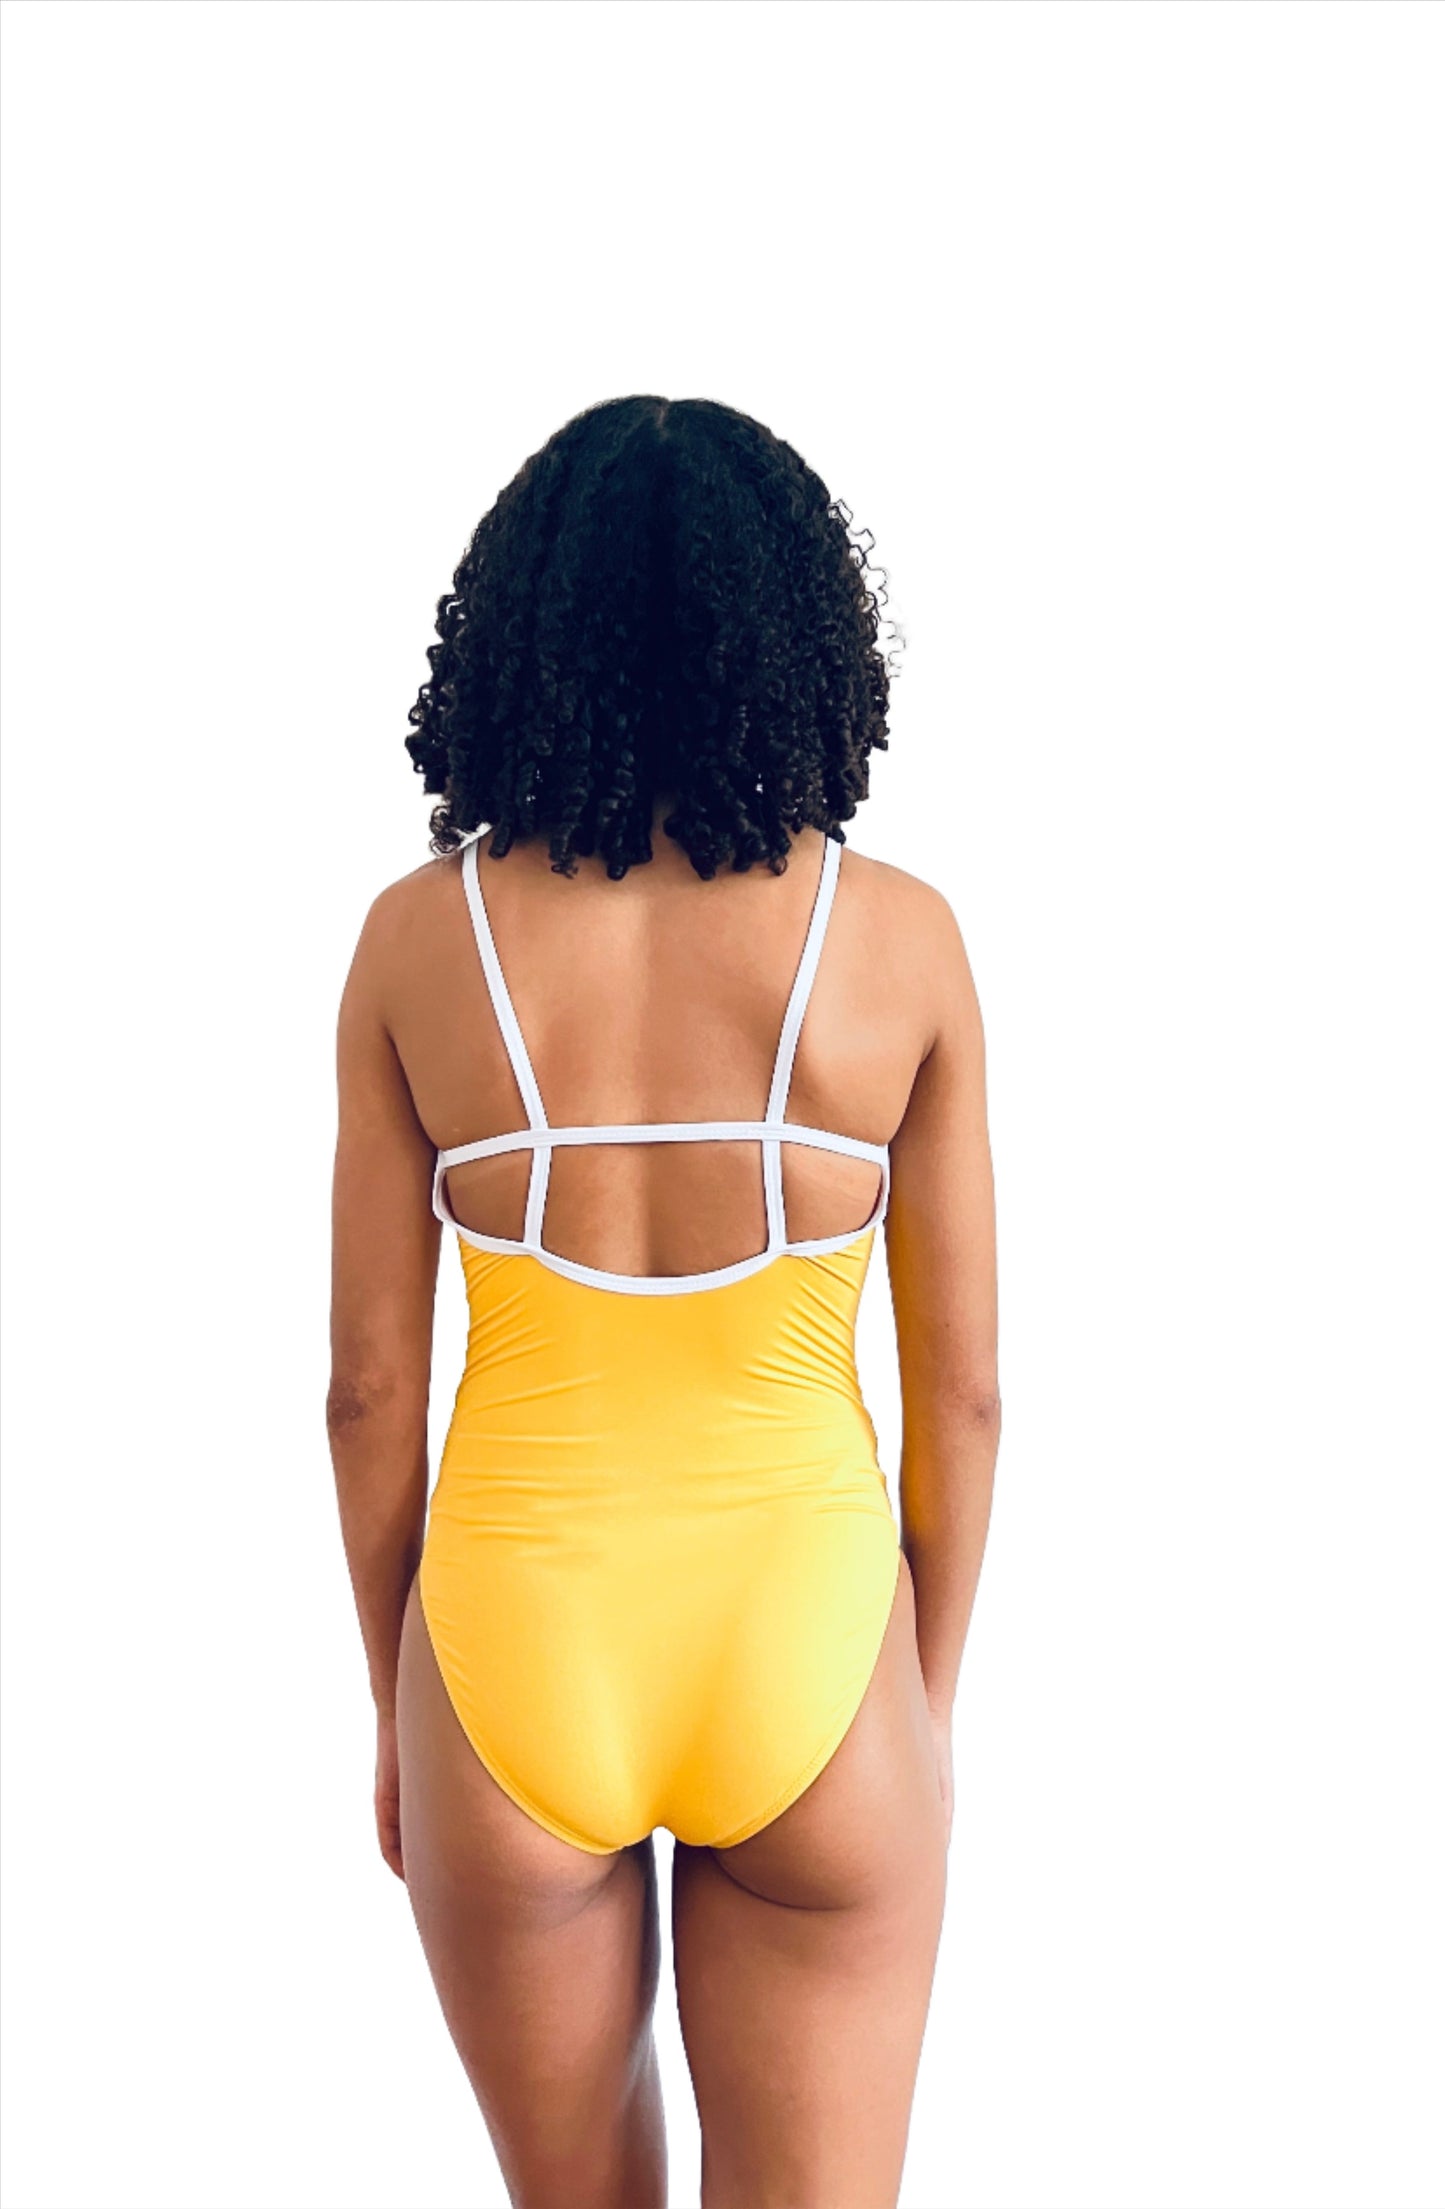 Yellow camisole leotard with white cross back from The Collective Dancewear